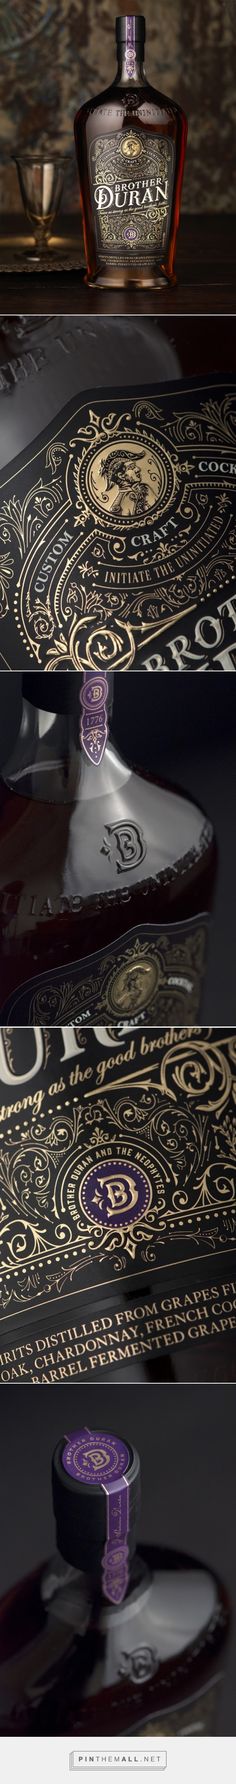 Brother Duran spirits packaging designed by CF NAPA Brand Design??? - <a href="http://www.packagingoftheworld.com/2015/11/brother-duran.html" rel="nofollow" target="_blank">www.packagingofth...</a>